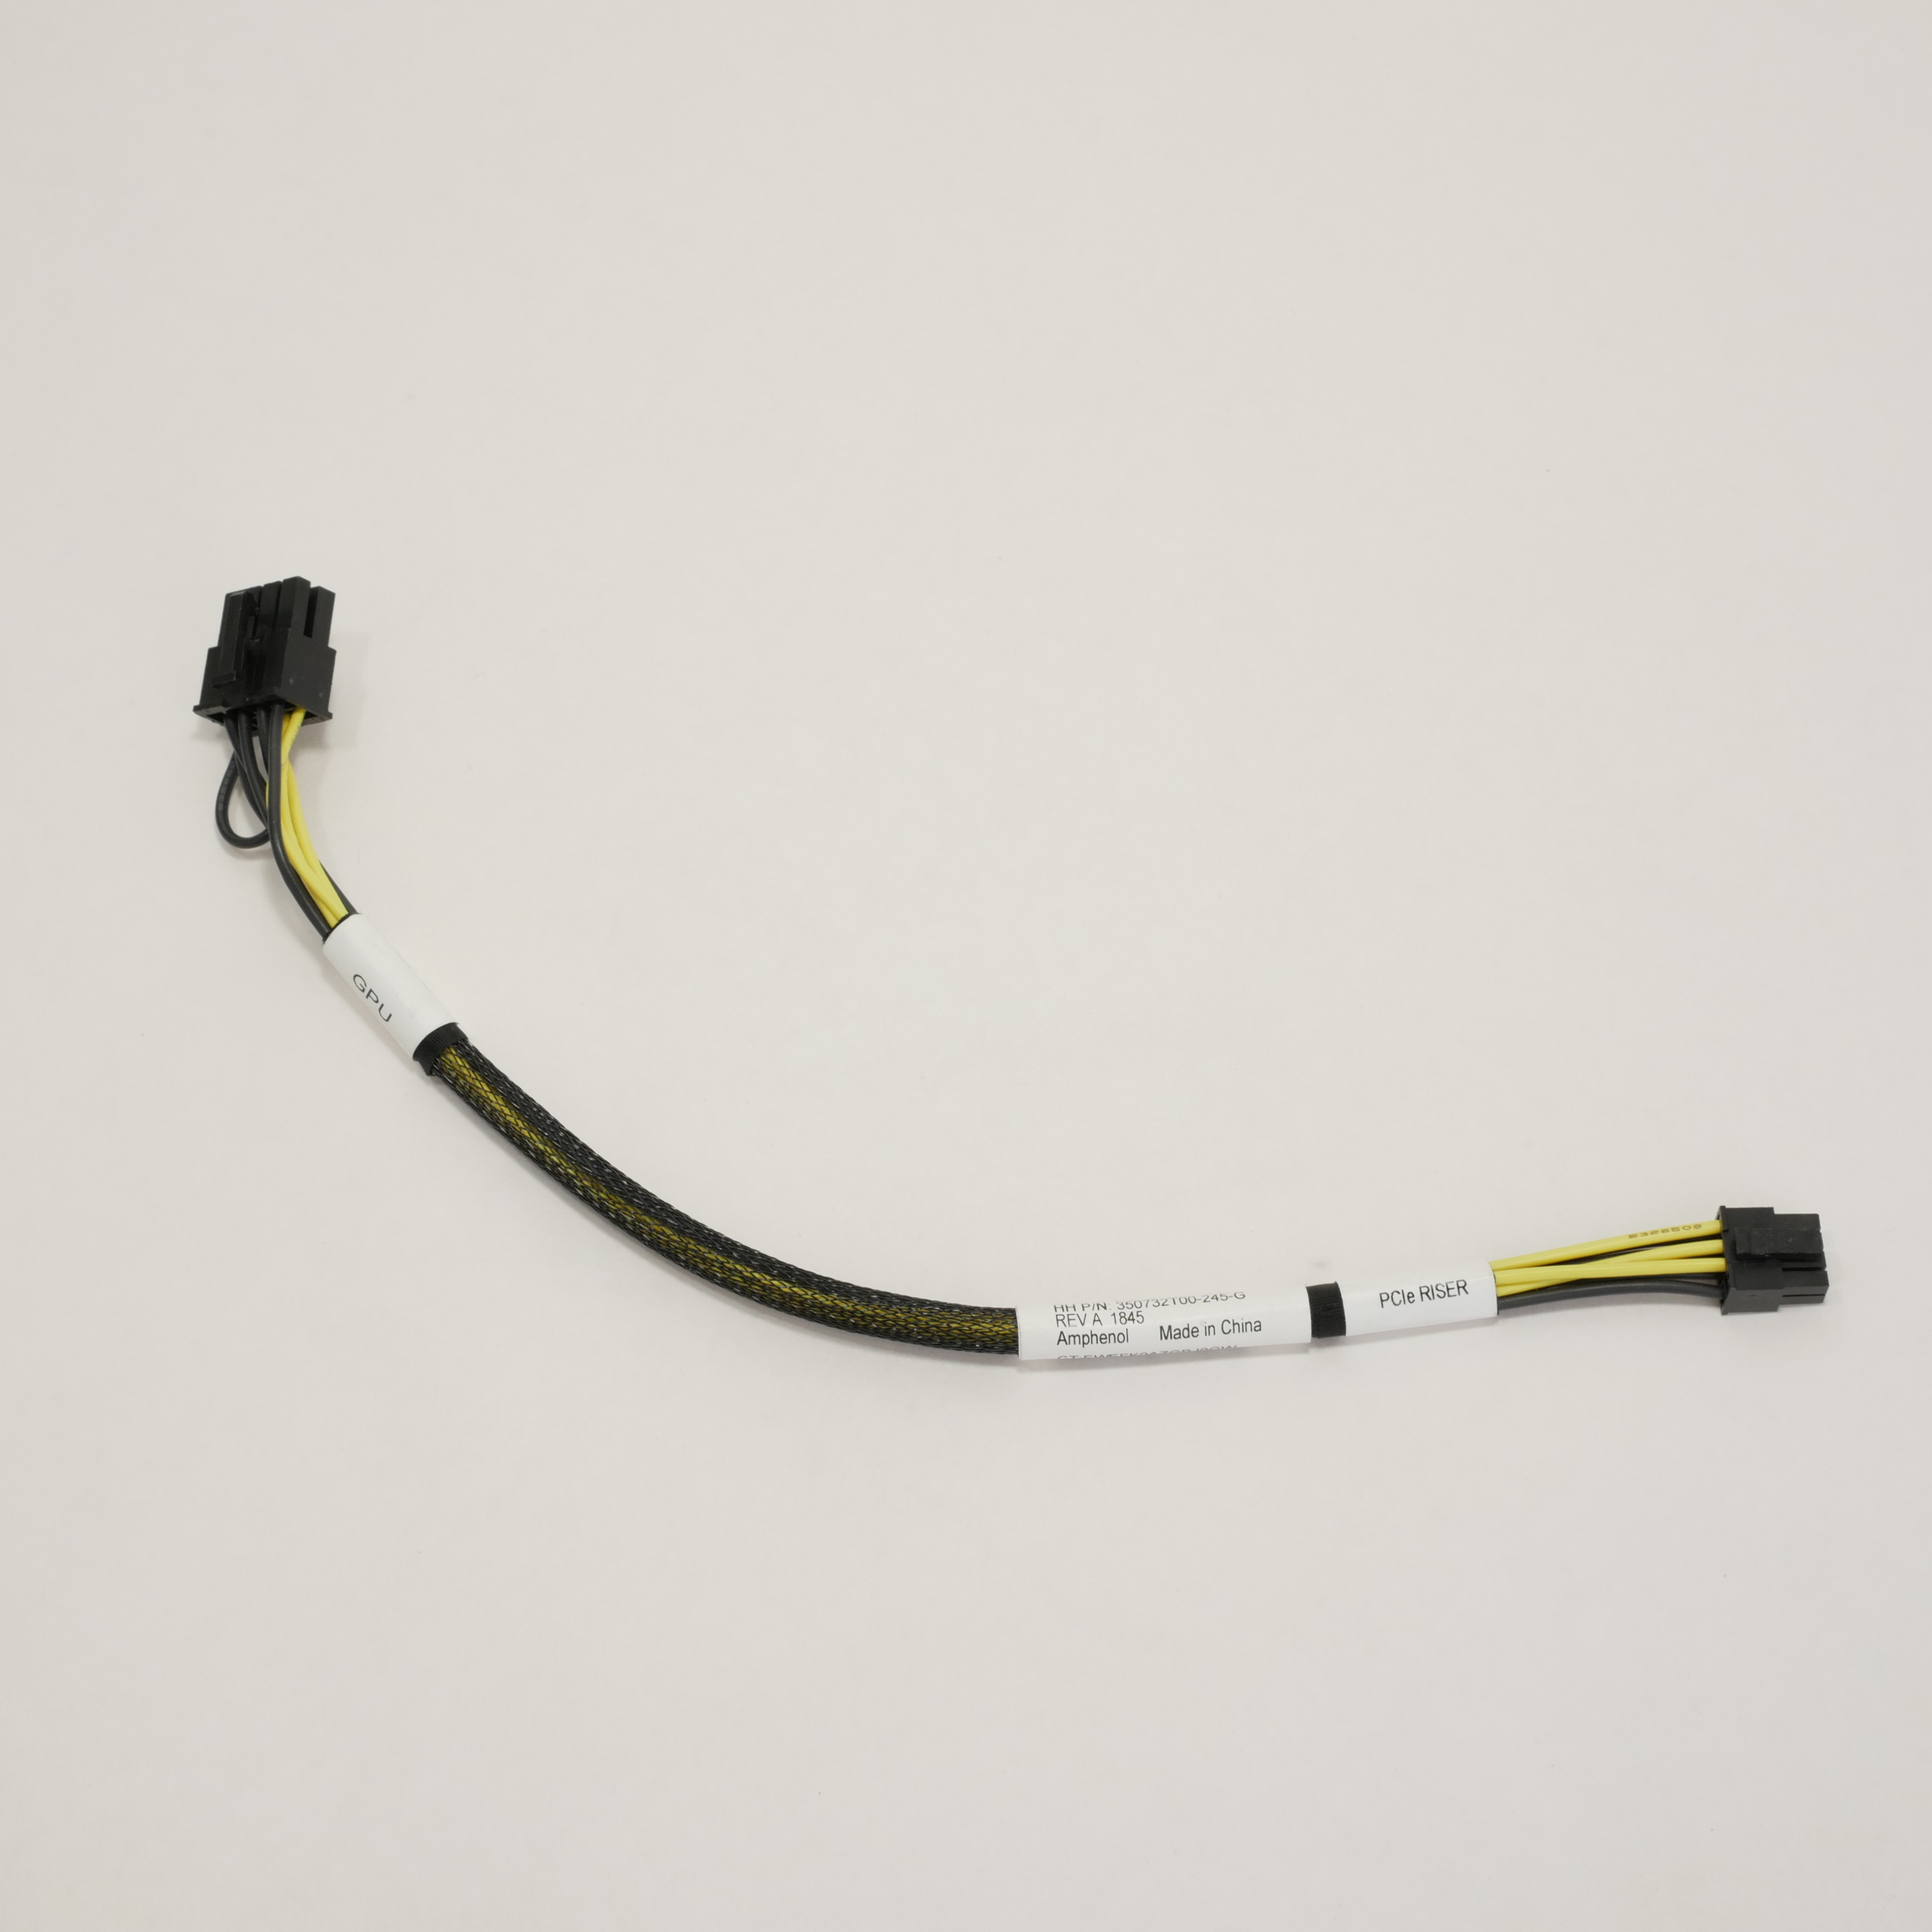 HPE GPU to PCIe Riser Power Cable 8pin to 8 pin for PROLIANT G8 G9 G10 Servers